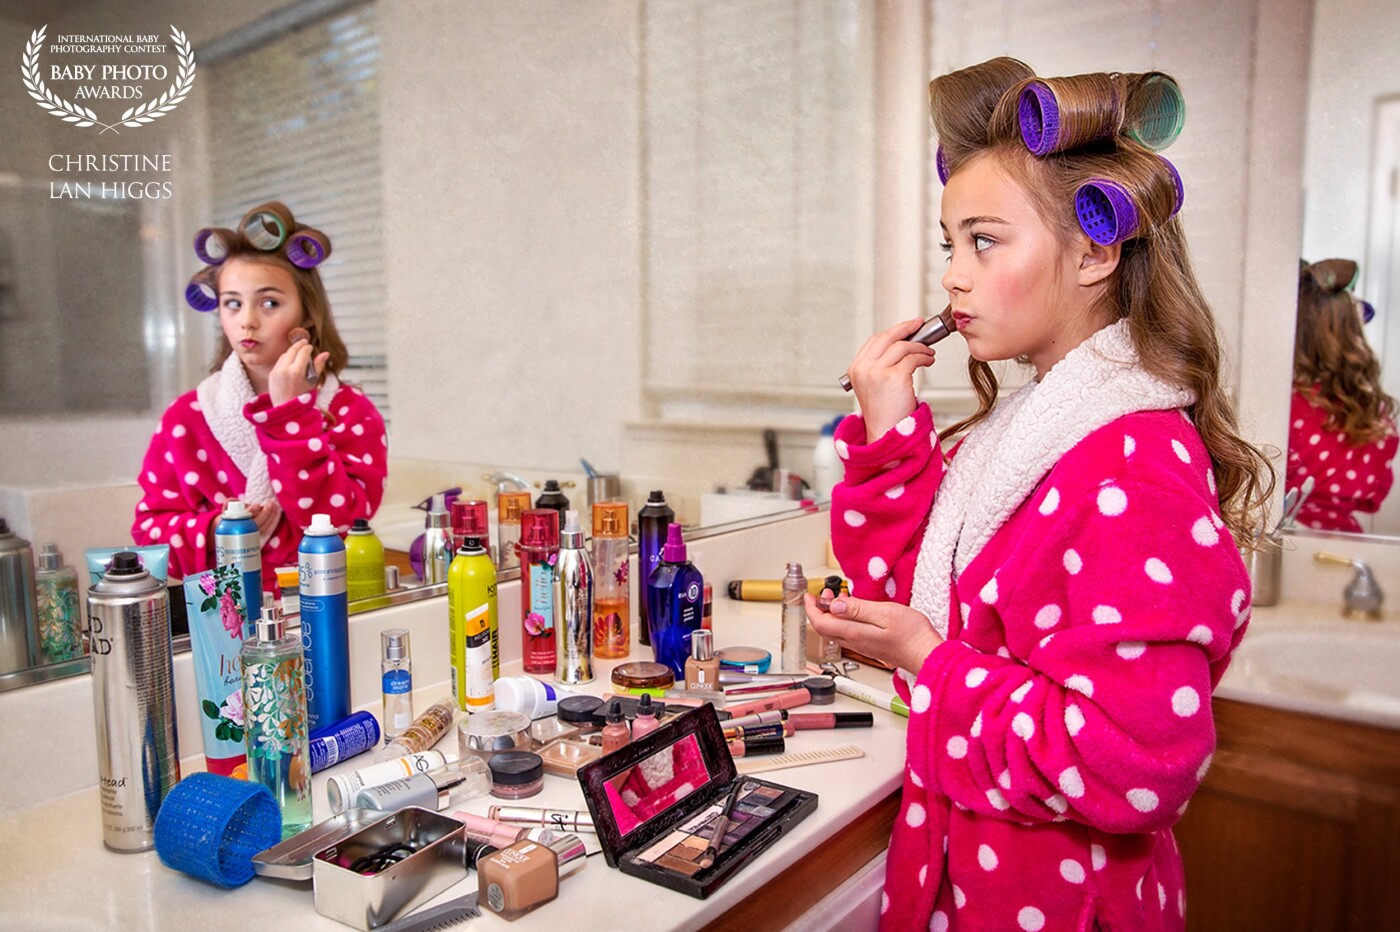 As a young girl, I remember sneaking into my Mom's makeup and styling products to use on myself. It made me feel so grown up. This young girl of 9 years old adores her Mom and is having so much fun exploring all her mom's beauty product treasures.